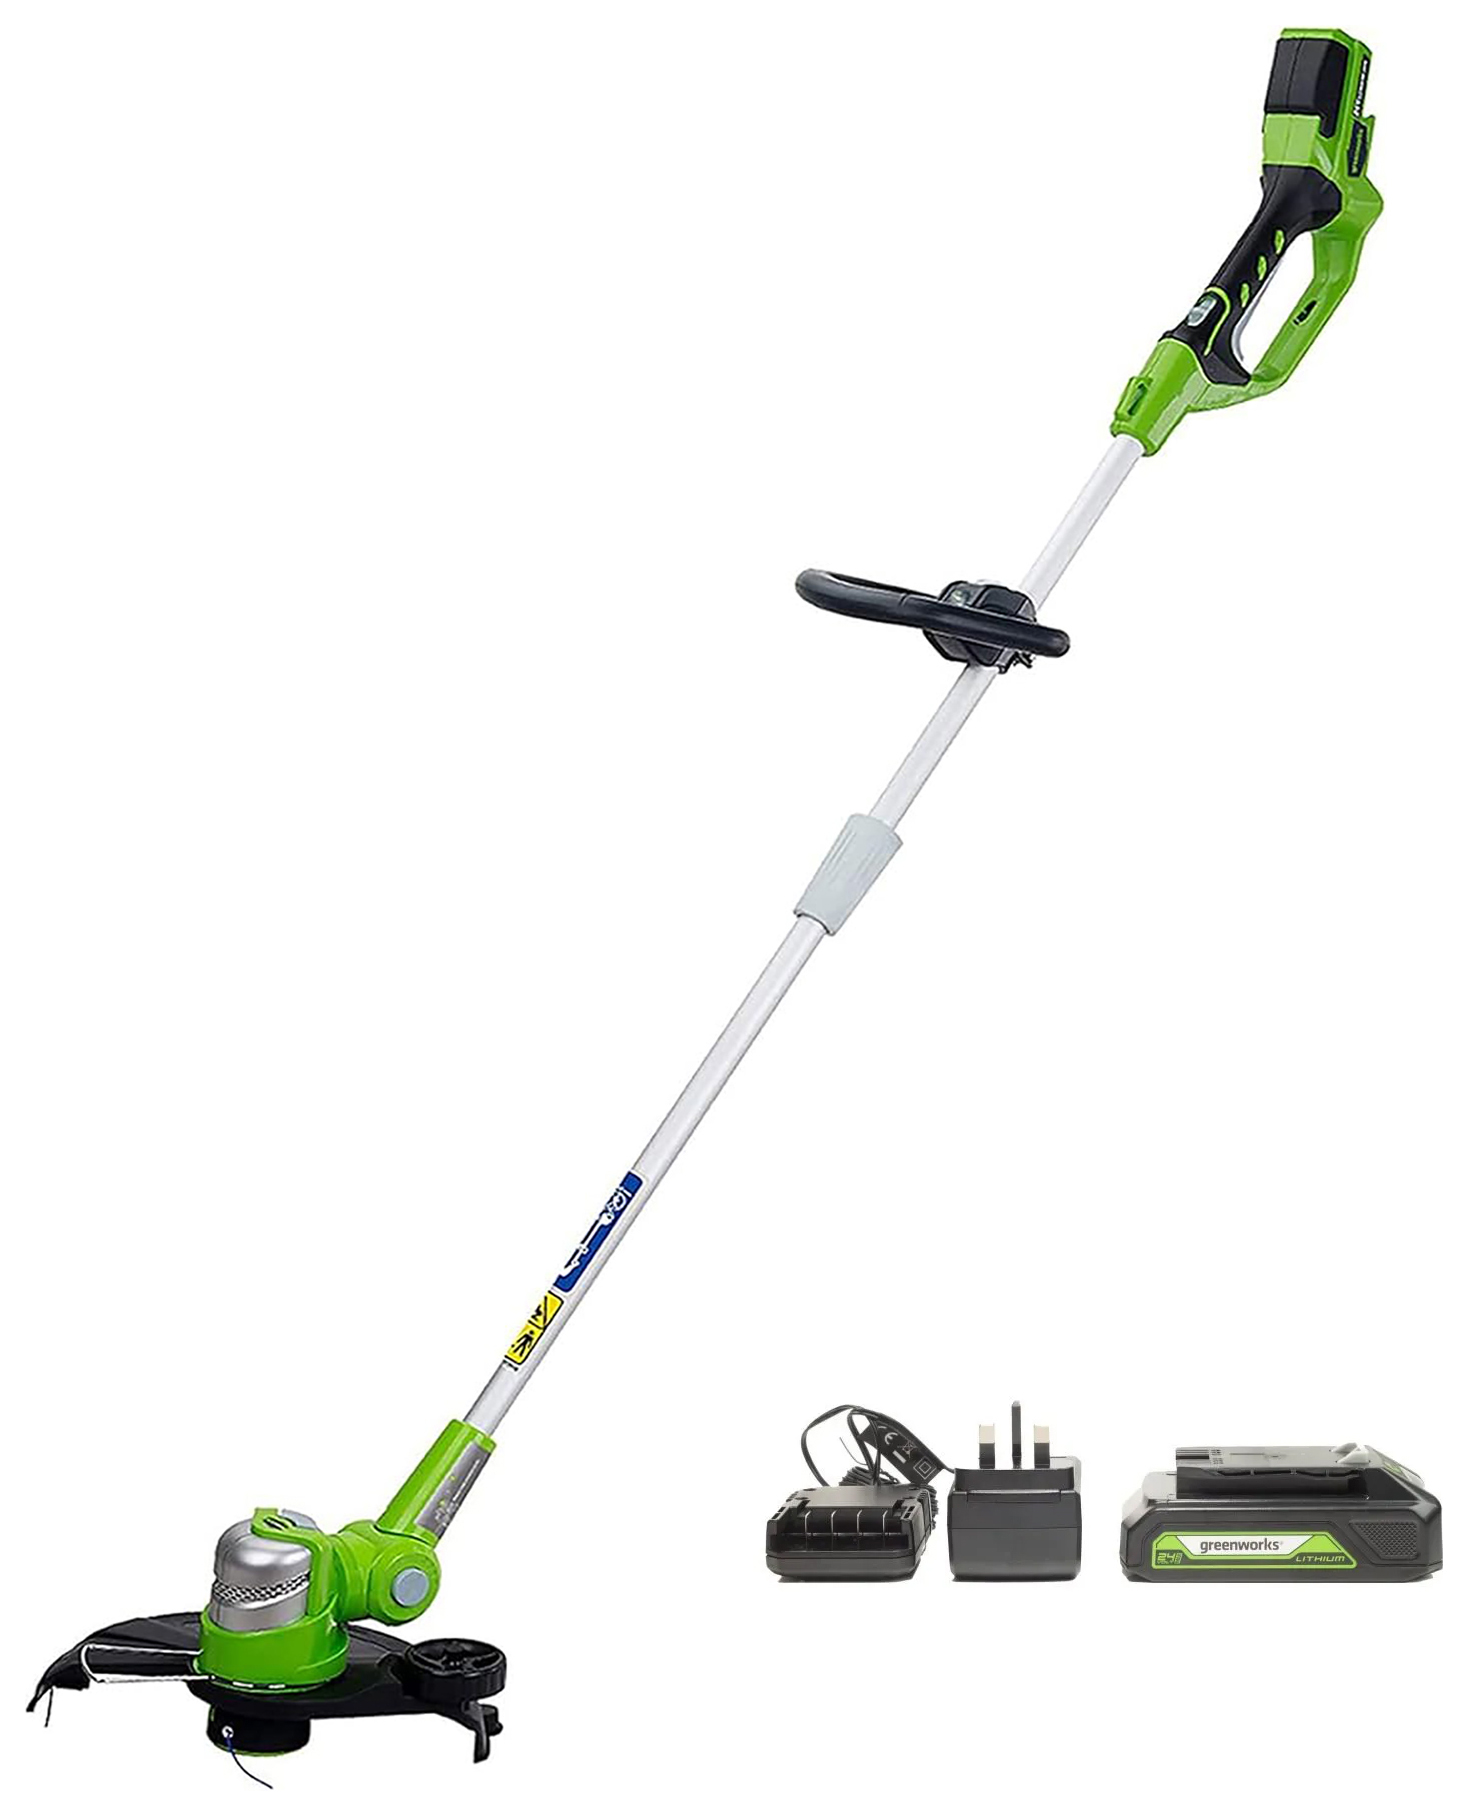 Greenworks 24V Cordless String Trimmer with 2Ah Battery & Universal Charger - 30cm